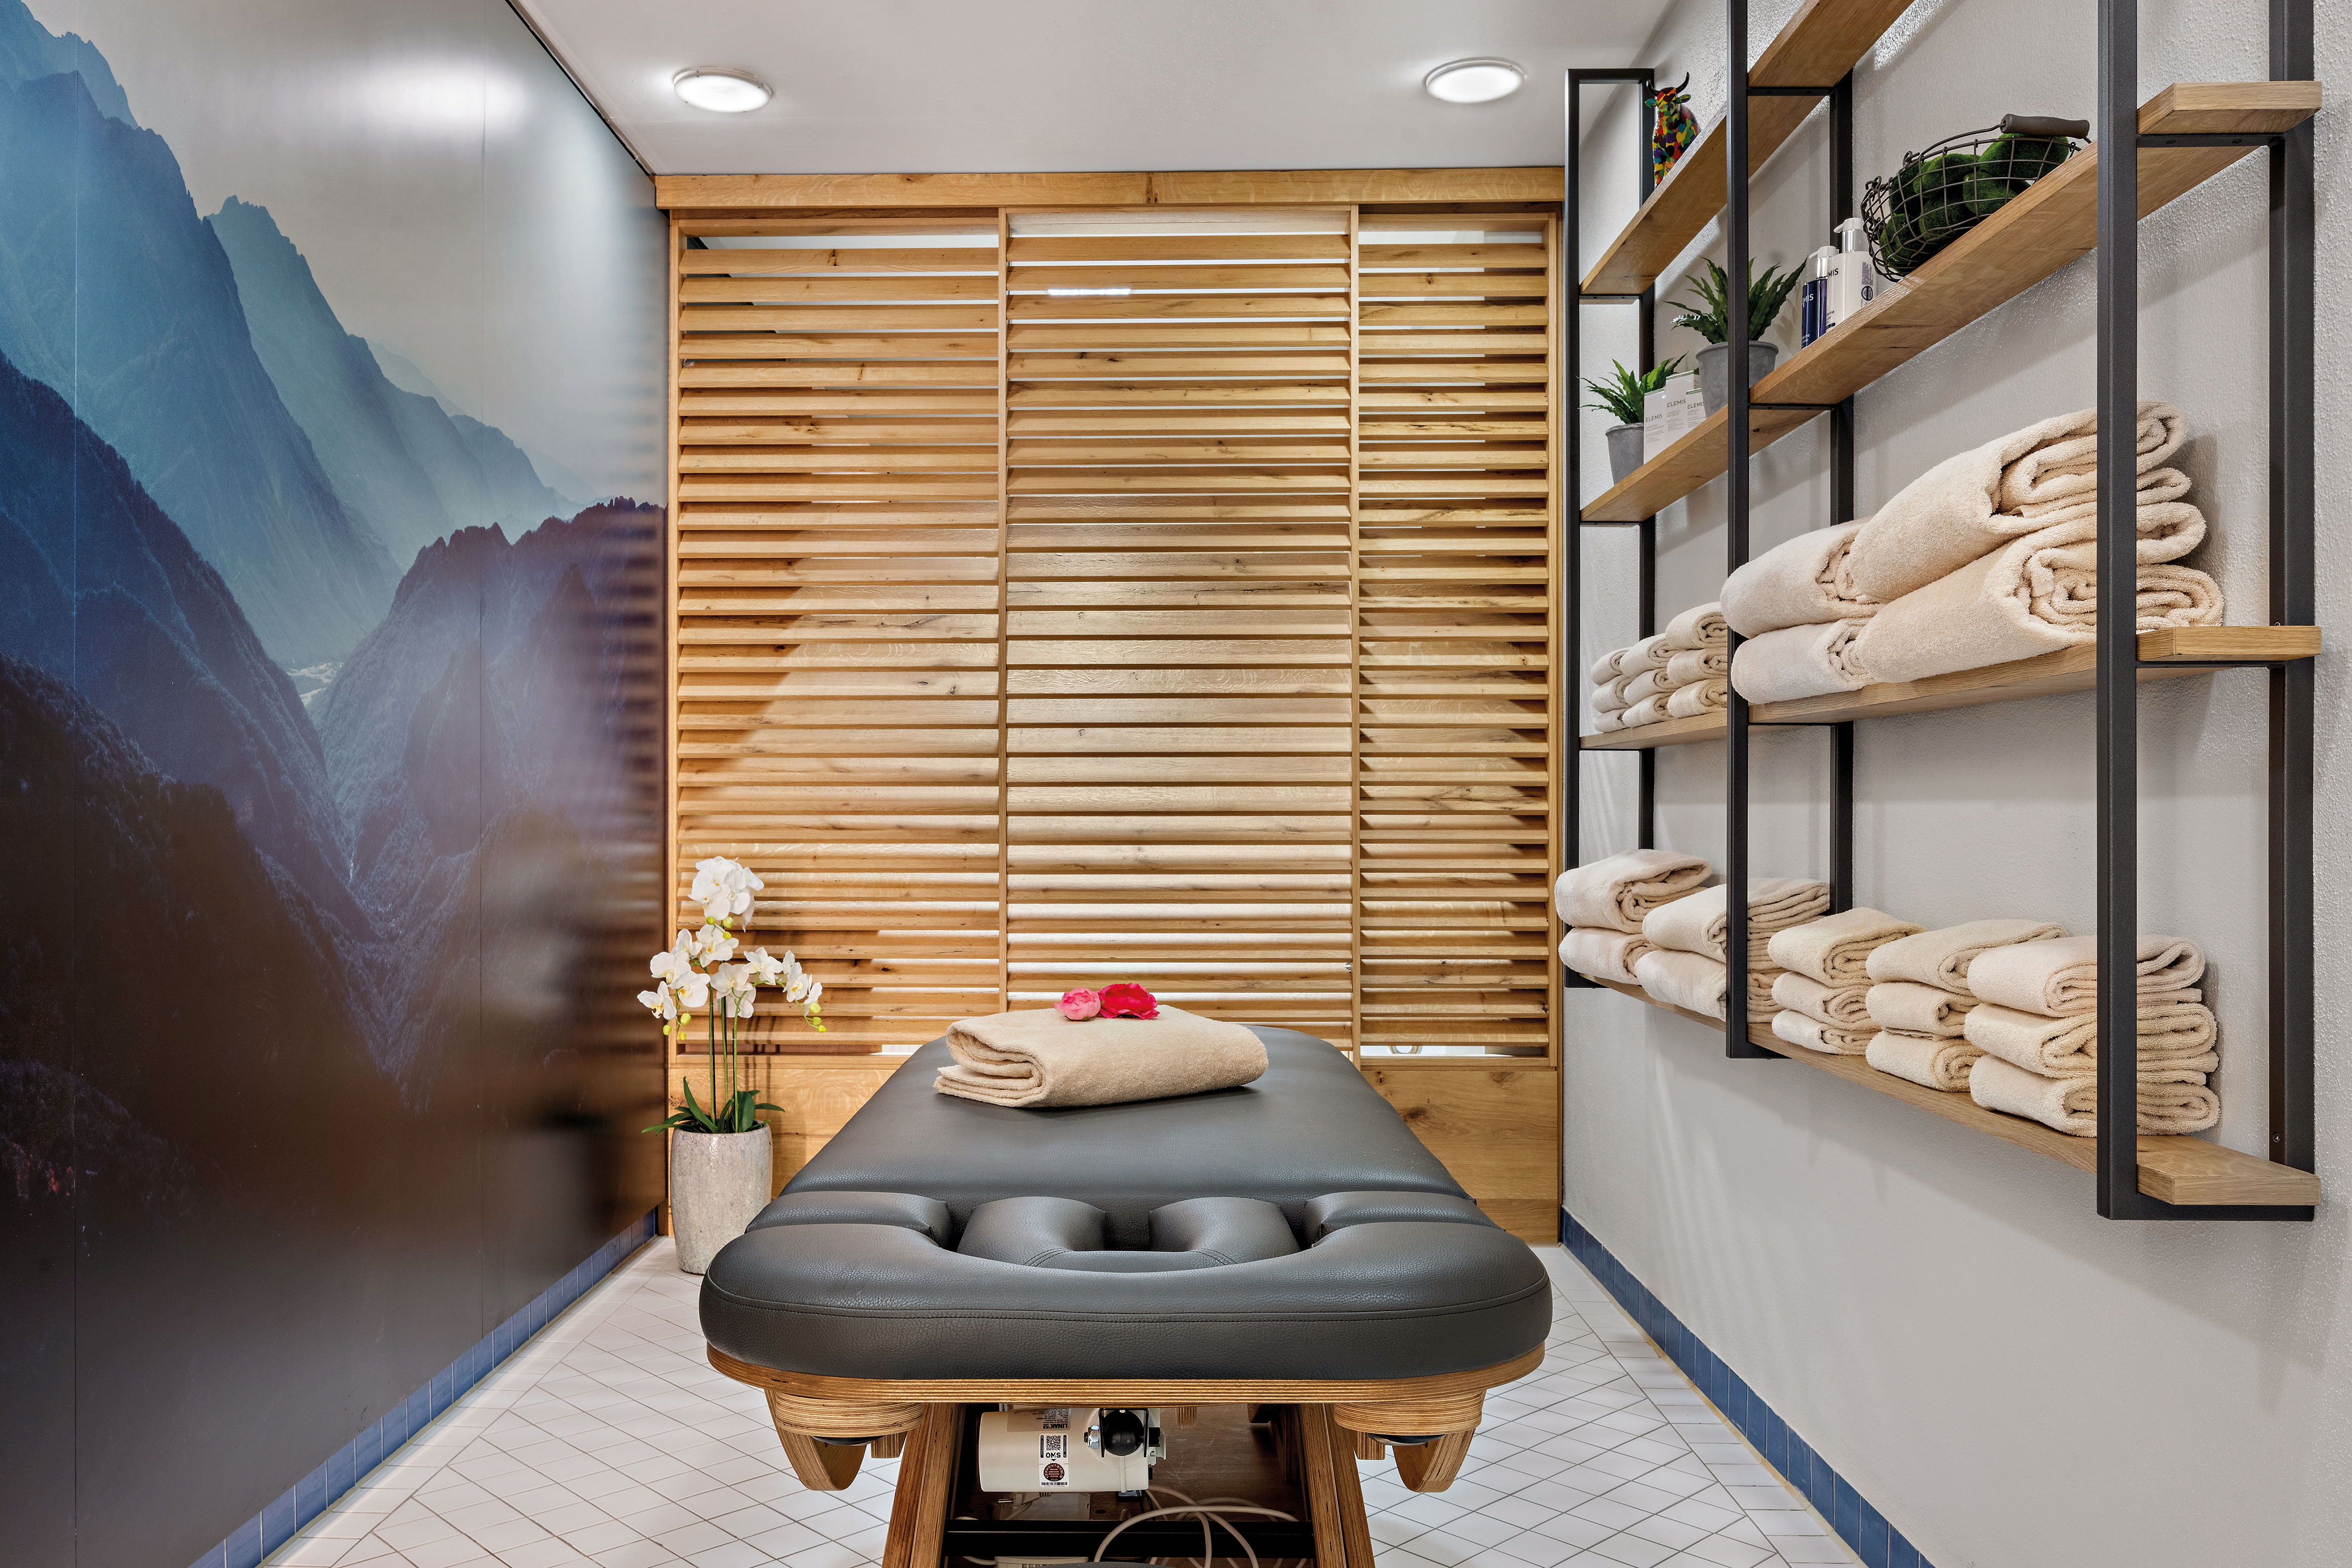 Massage Bed and Folded Towels in Treatment Room at the Spa